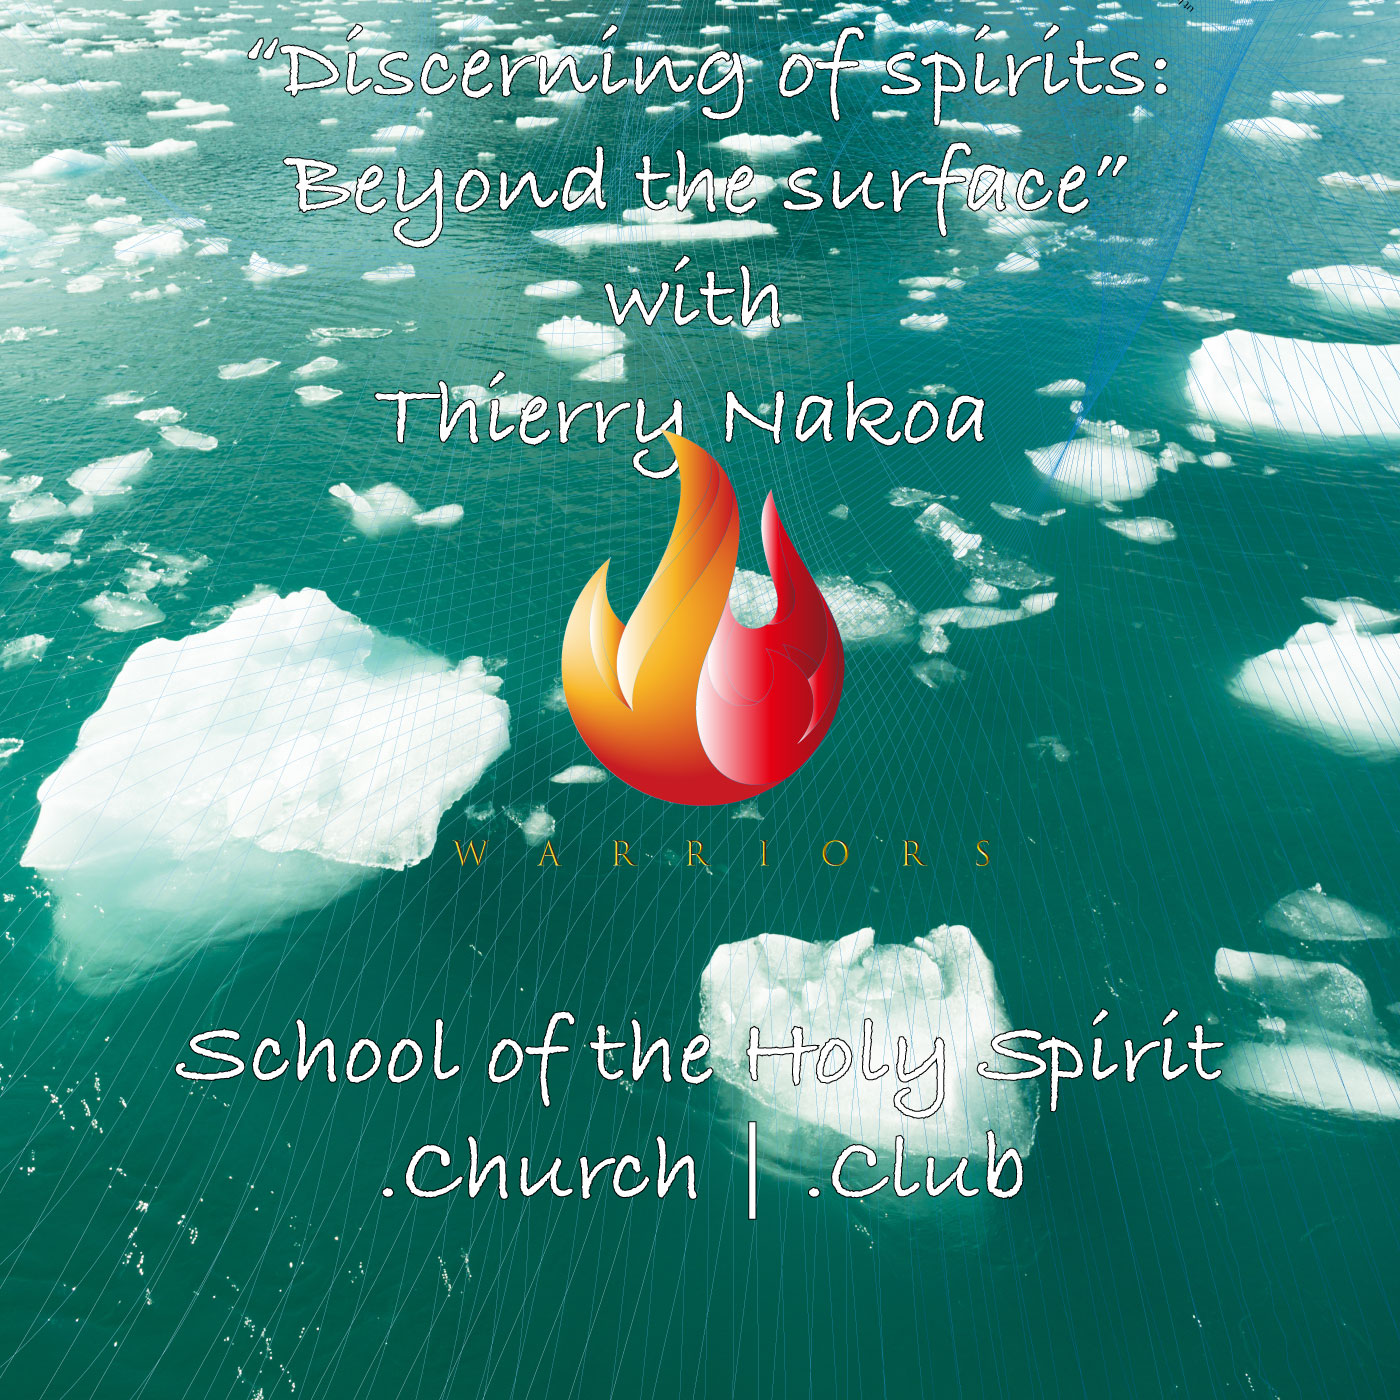 Discerning of spirits: Beyond the surface with Thierry Nakoa